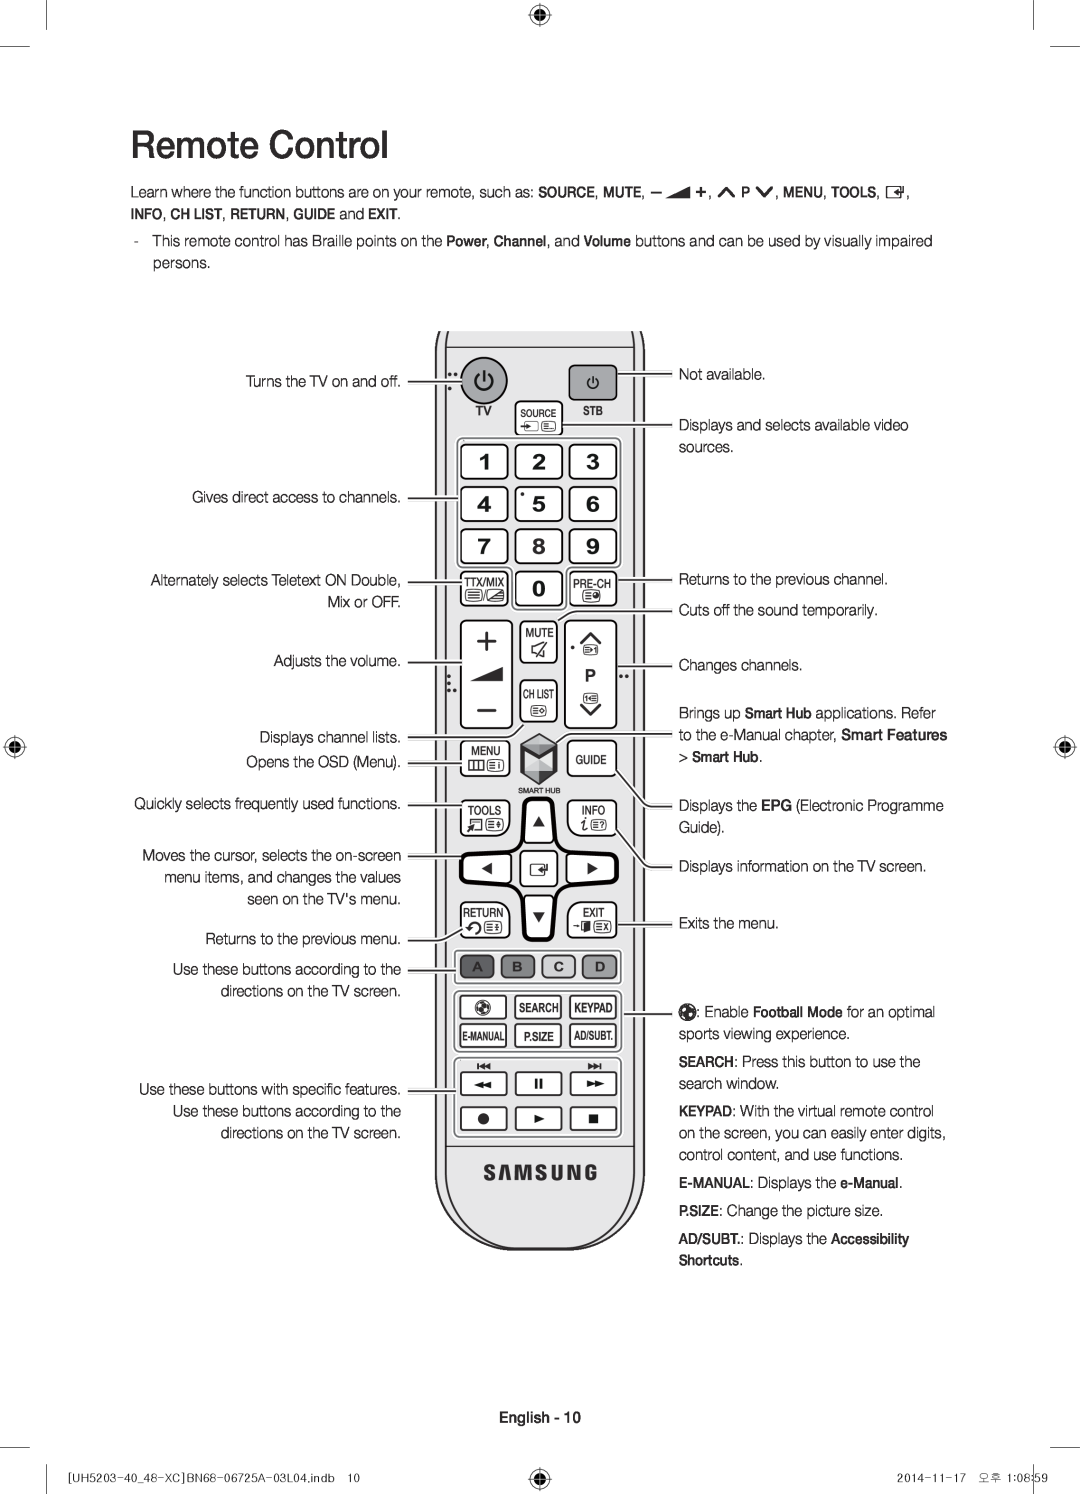 Samsung UE40H5203AWXXC Remote Control, Smart Hub, Displays information on the TV screen, E-MANUAL Displays the e-Manual 